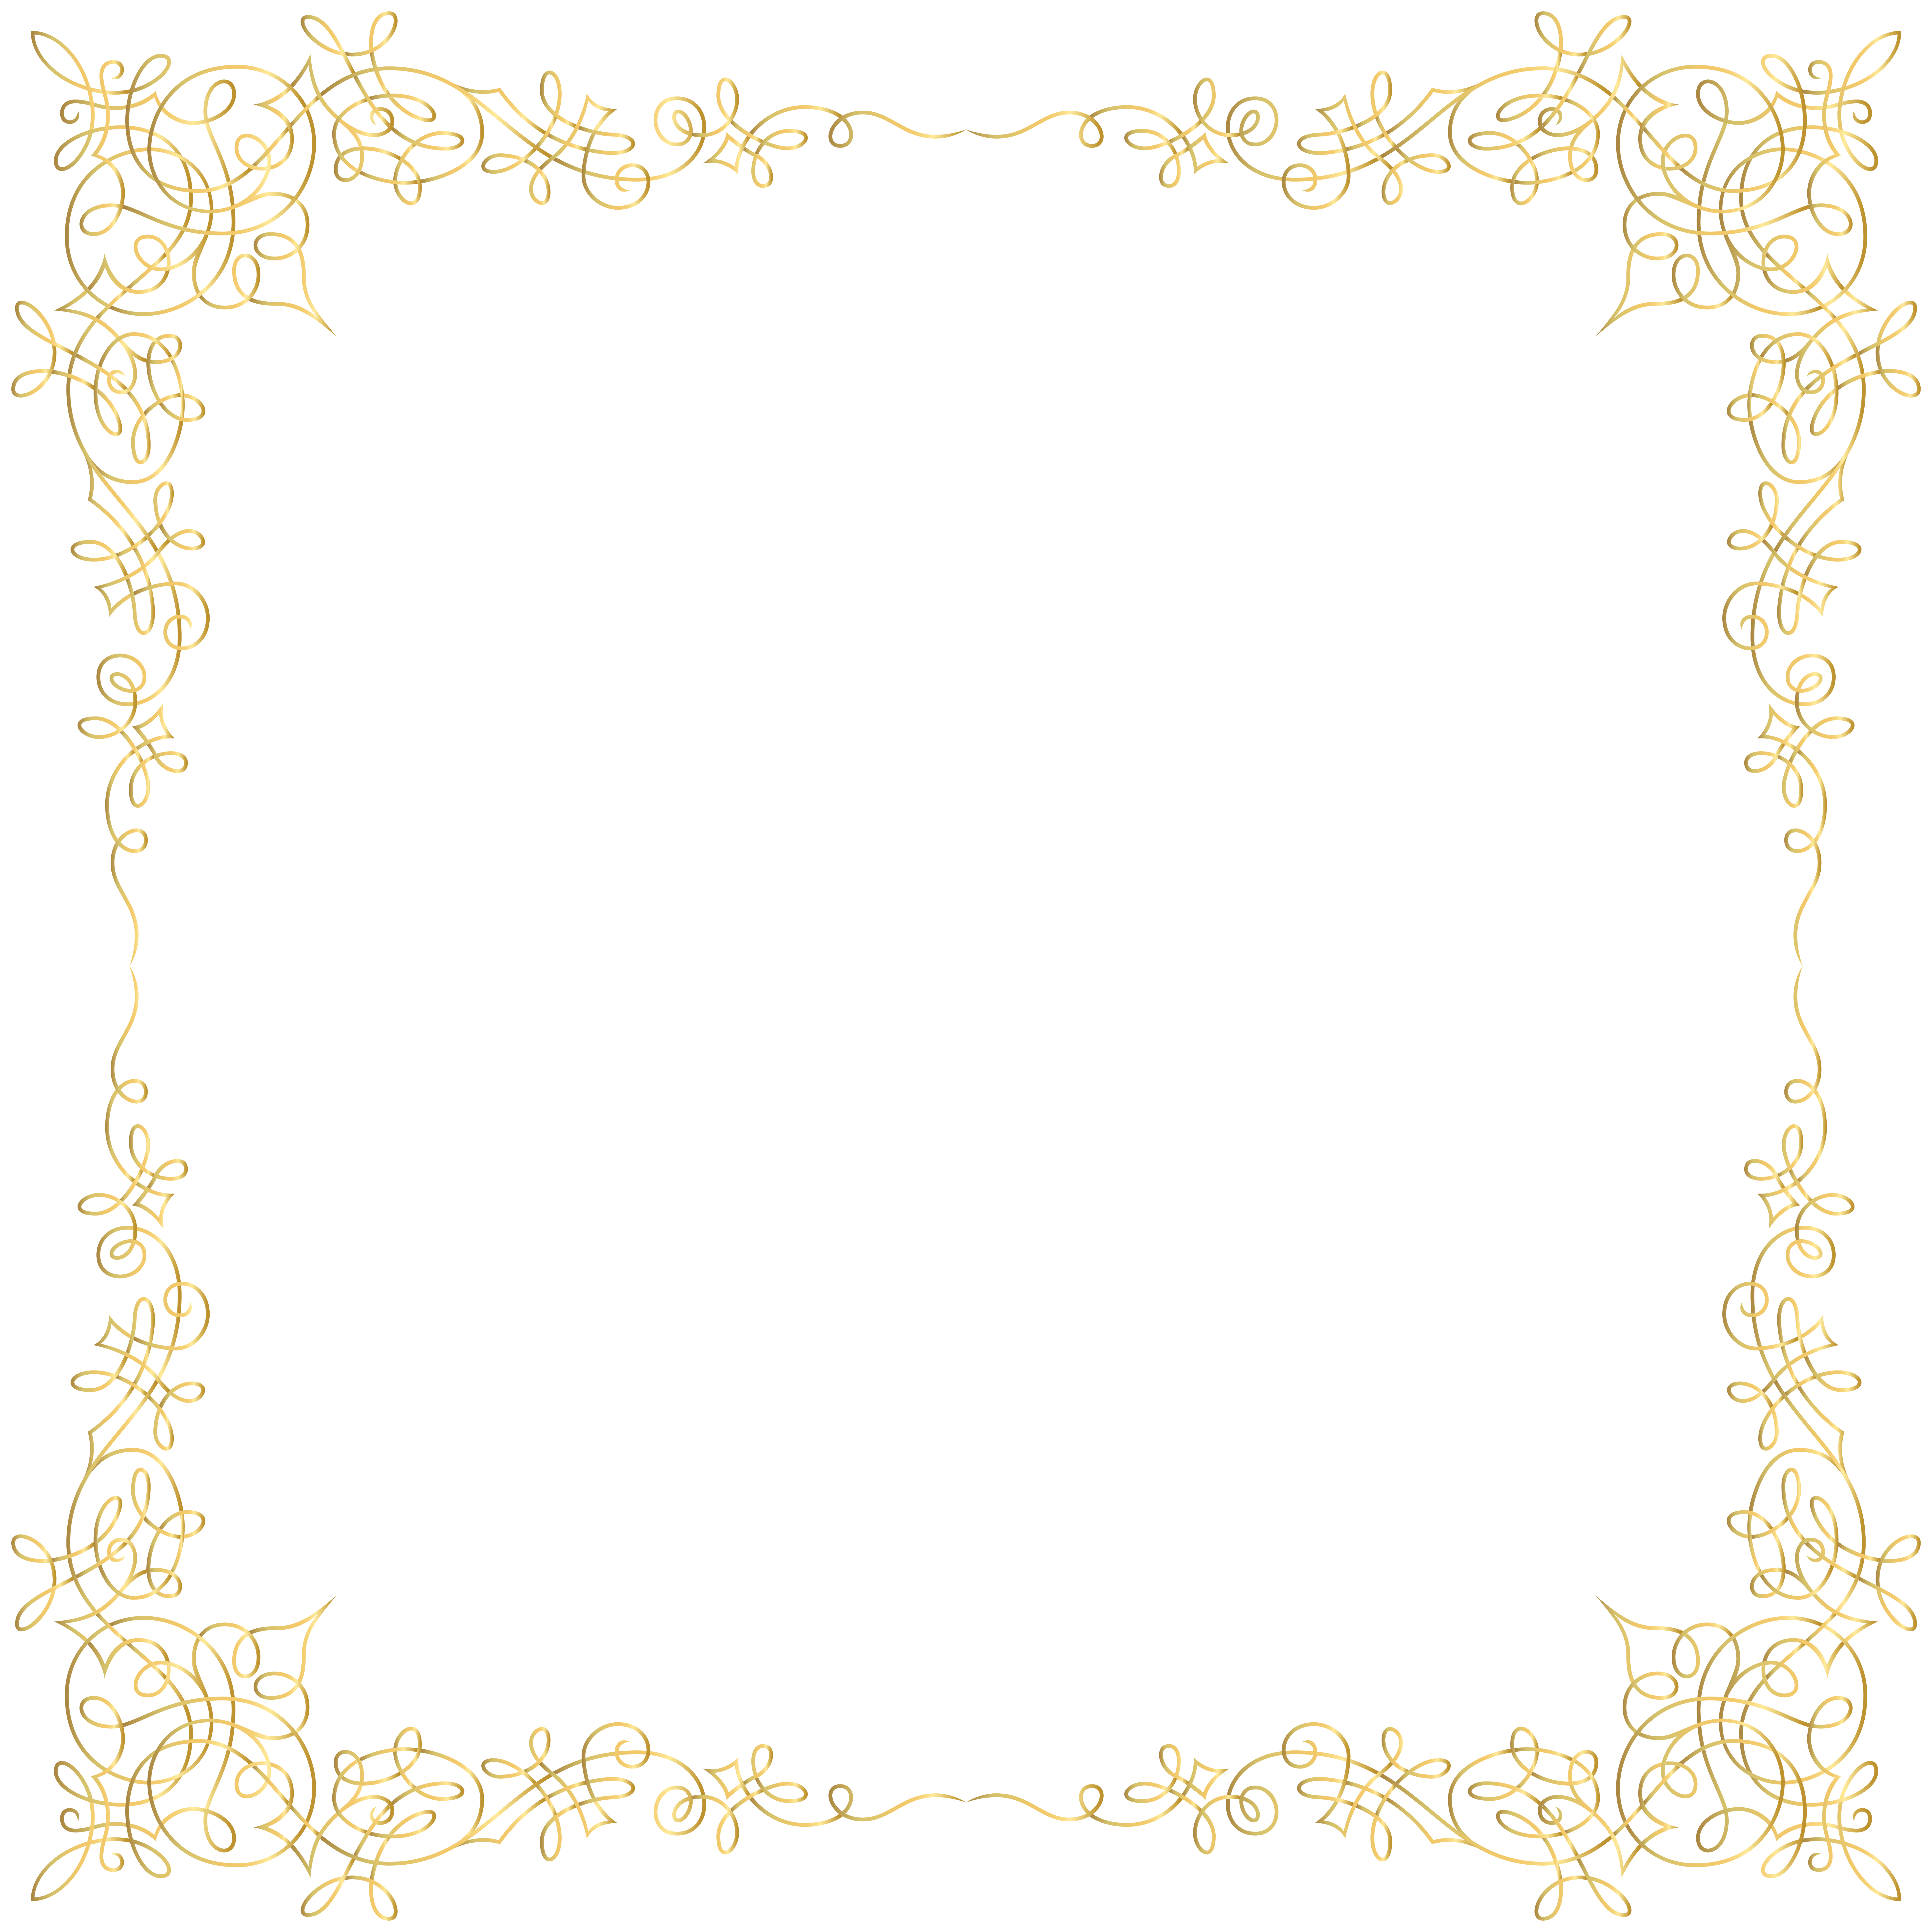 Golden Border Transparent PNG Image​-Quality Free Image and Transparent PNG Clipart